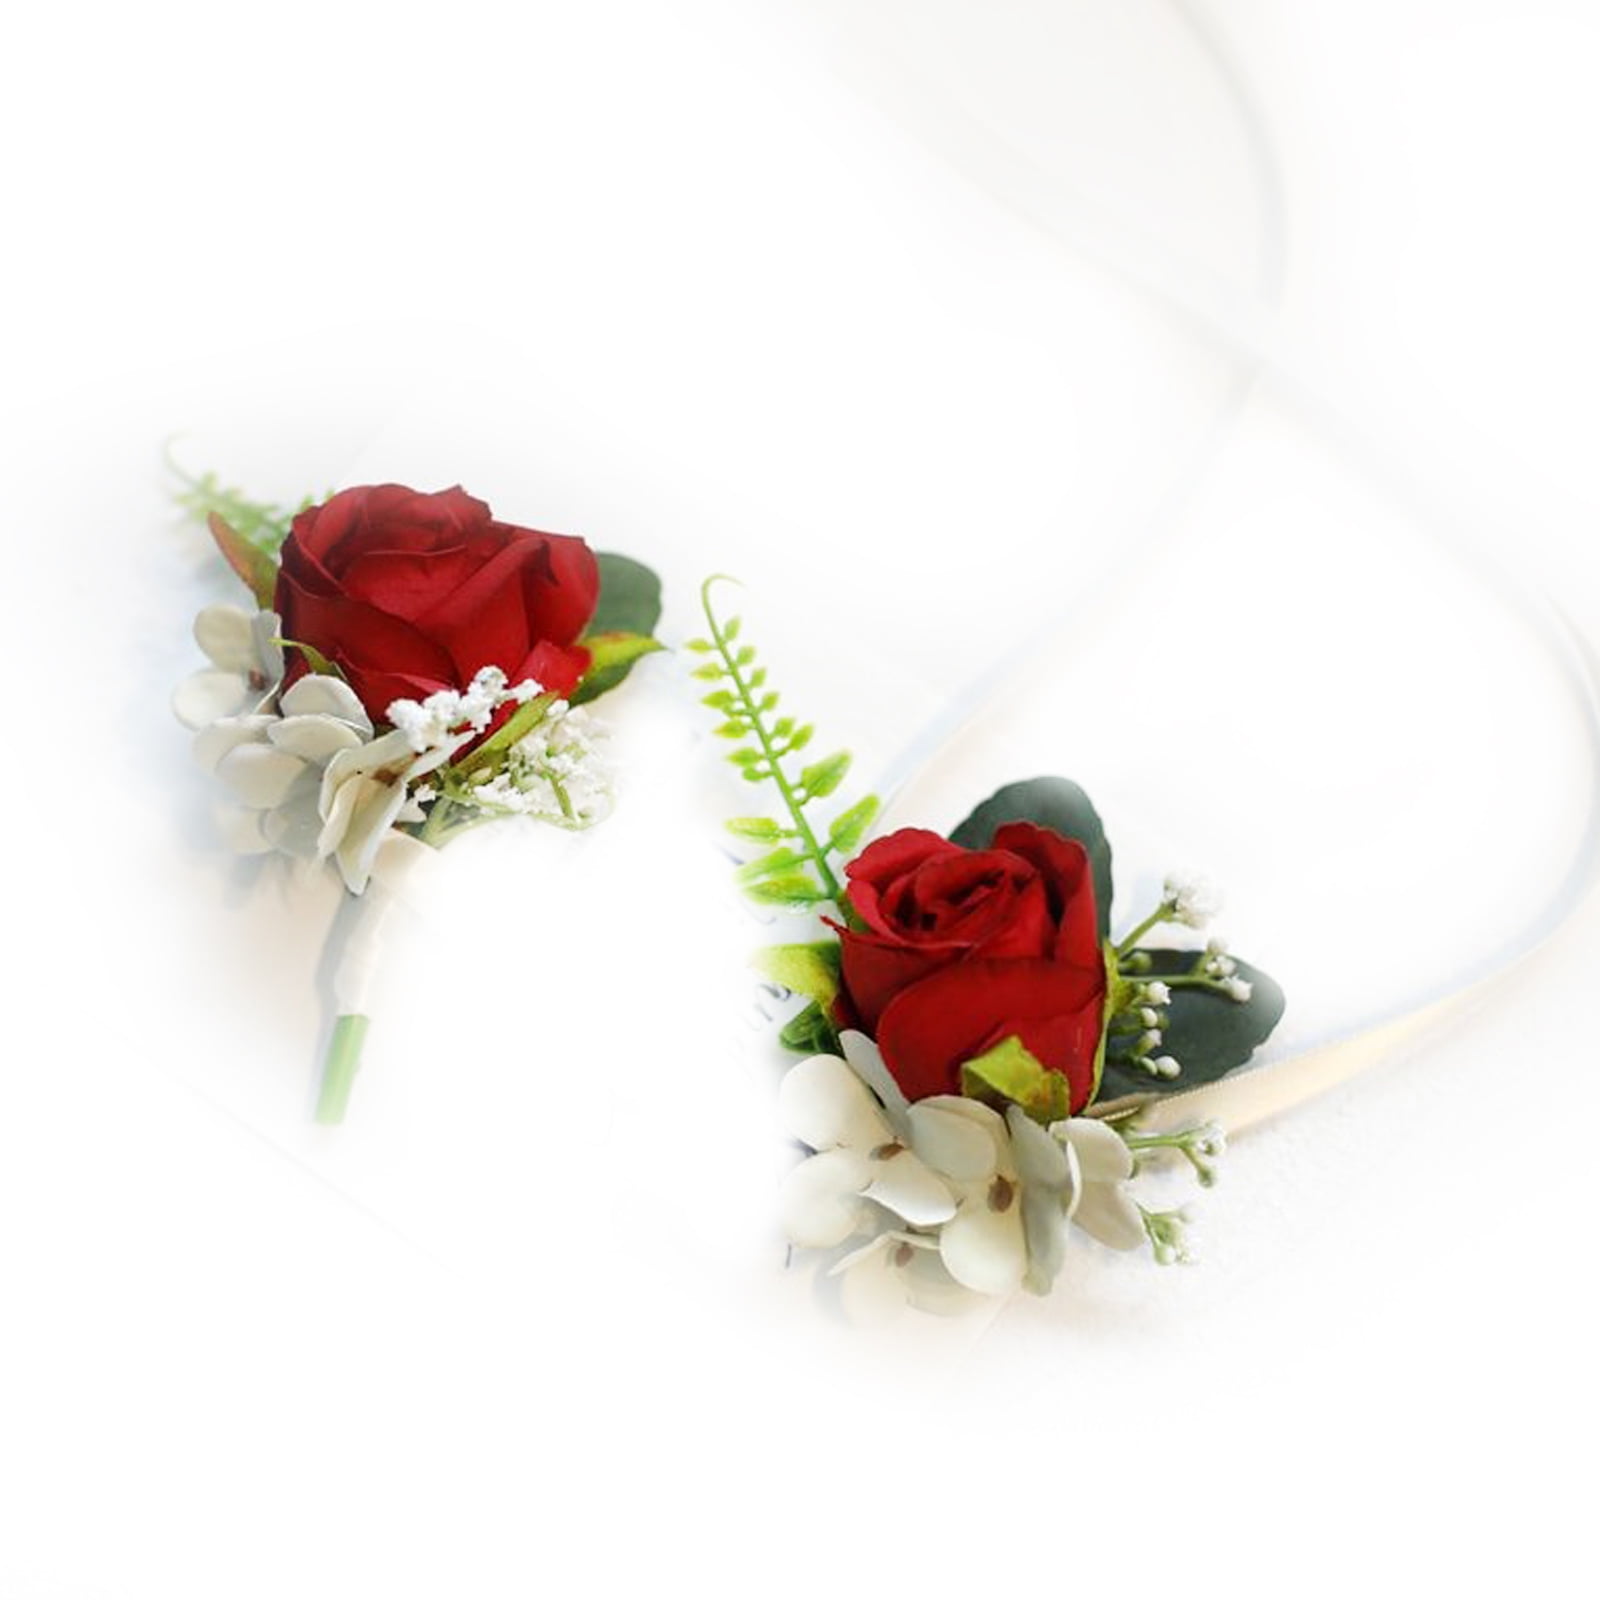 Wrist Corsage and Boutonniere set,handmade,Wedding,Party,Dancing 